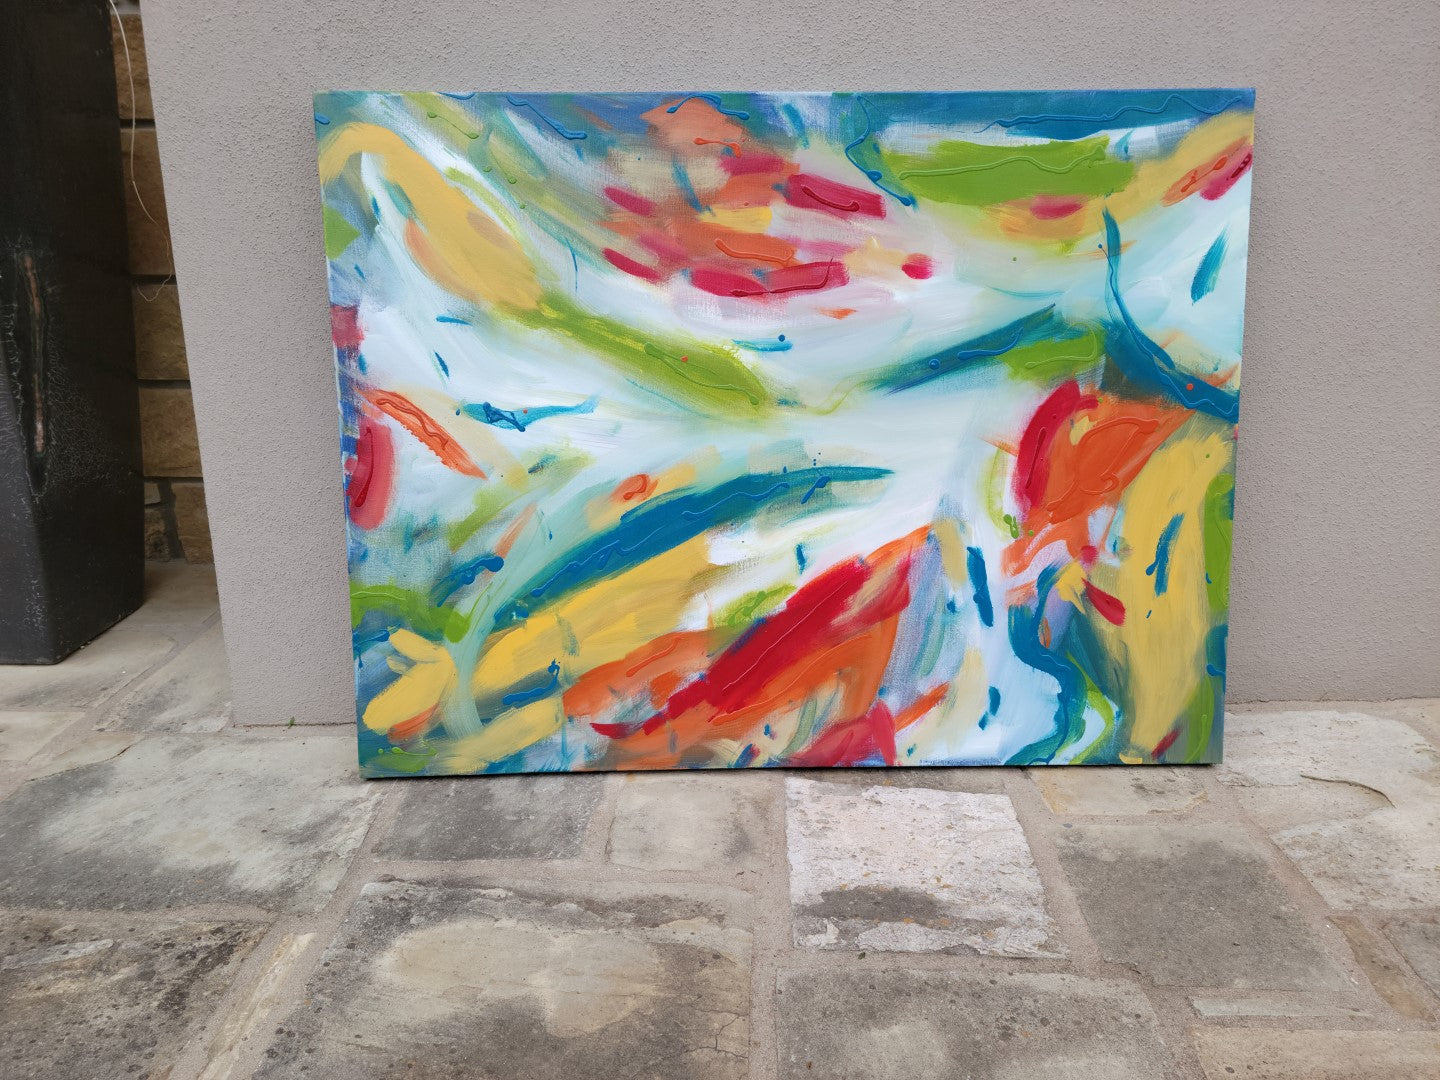 Frantic Fingers - Original Abstract Painting in Austin Texas 30" x 40"